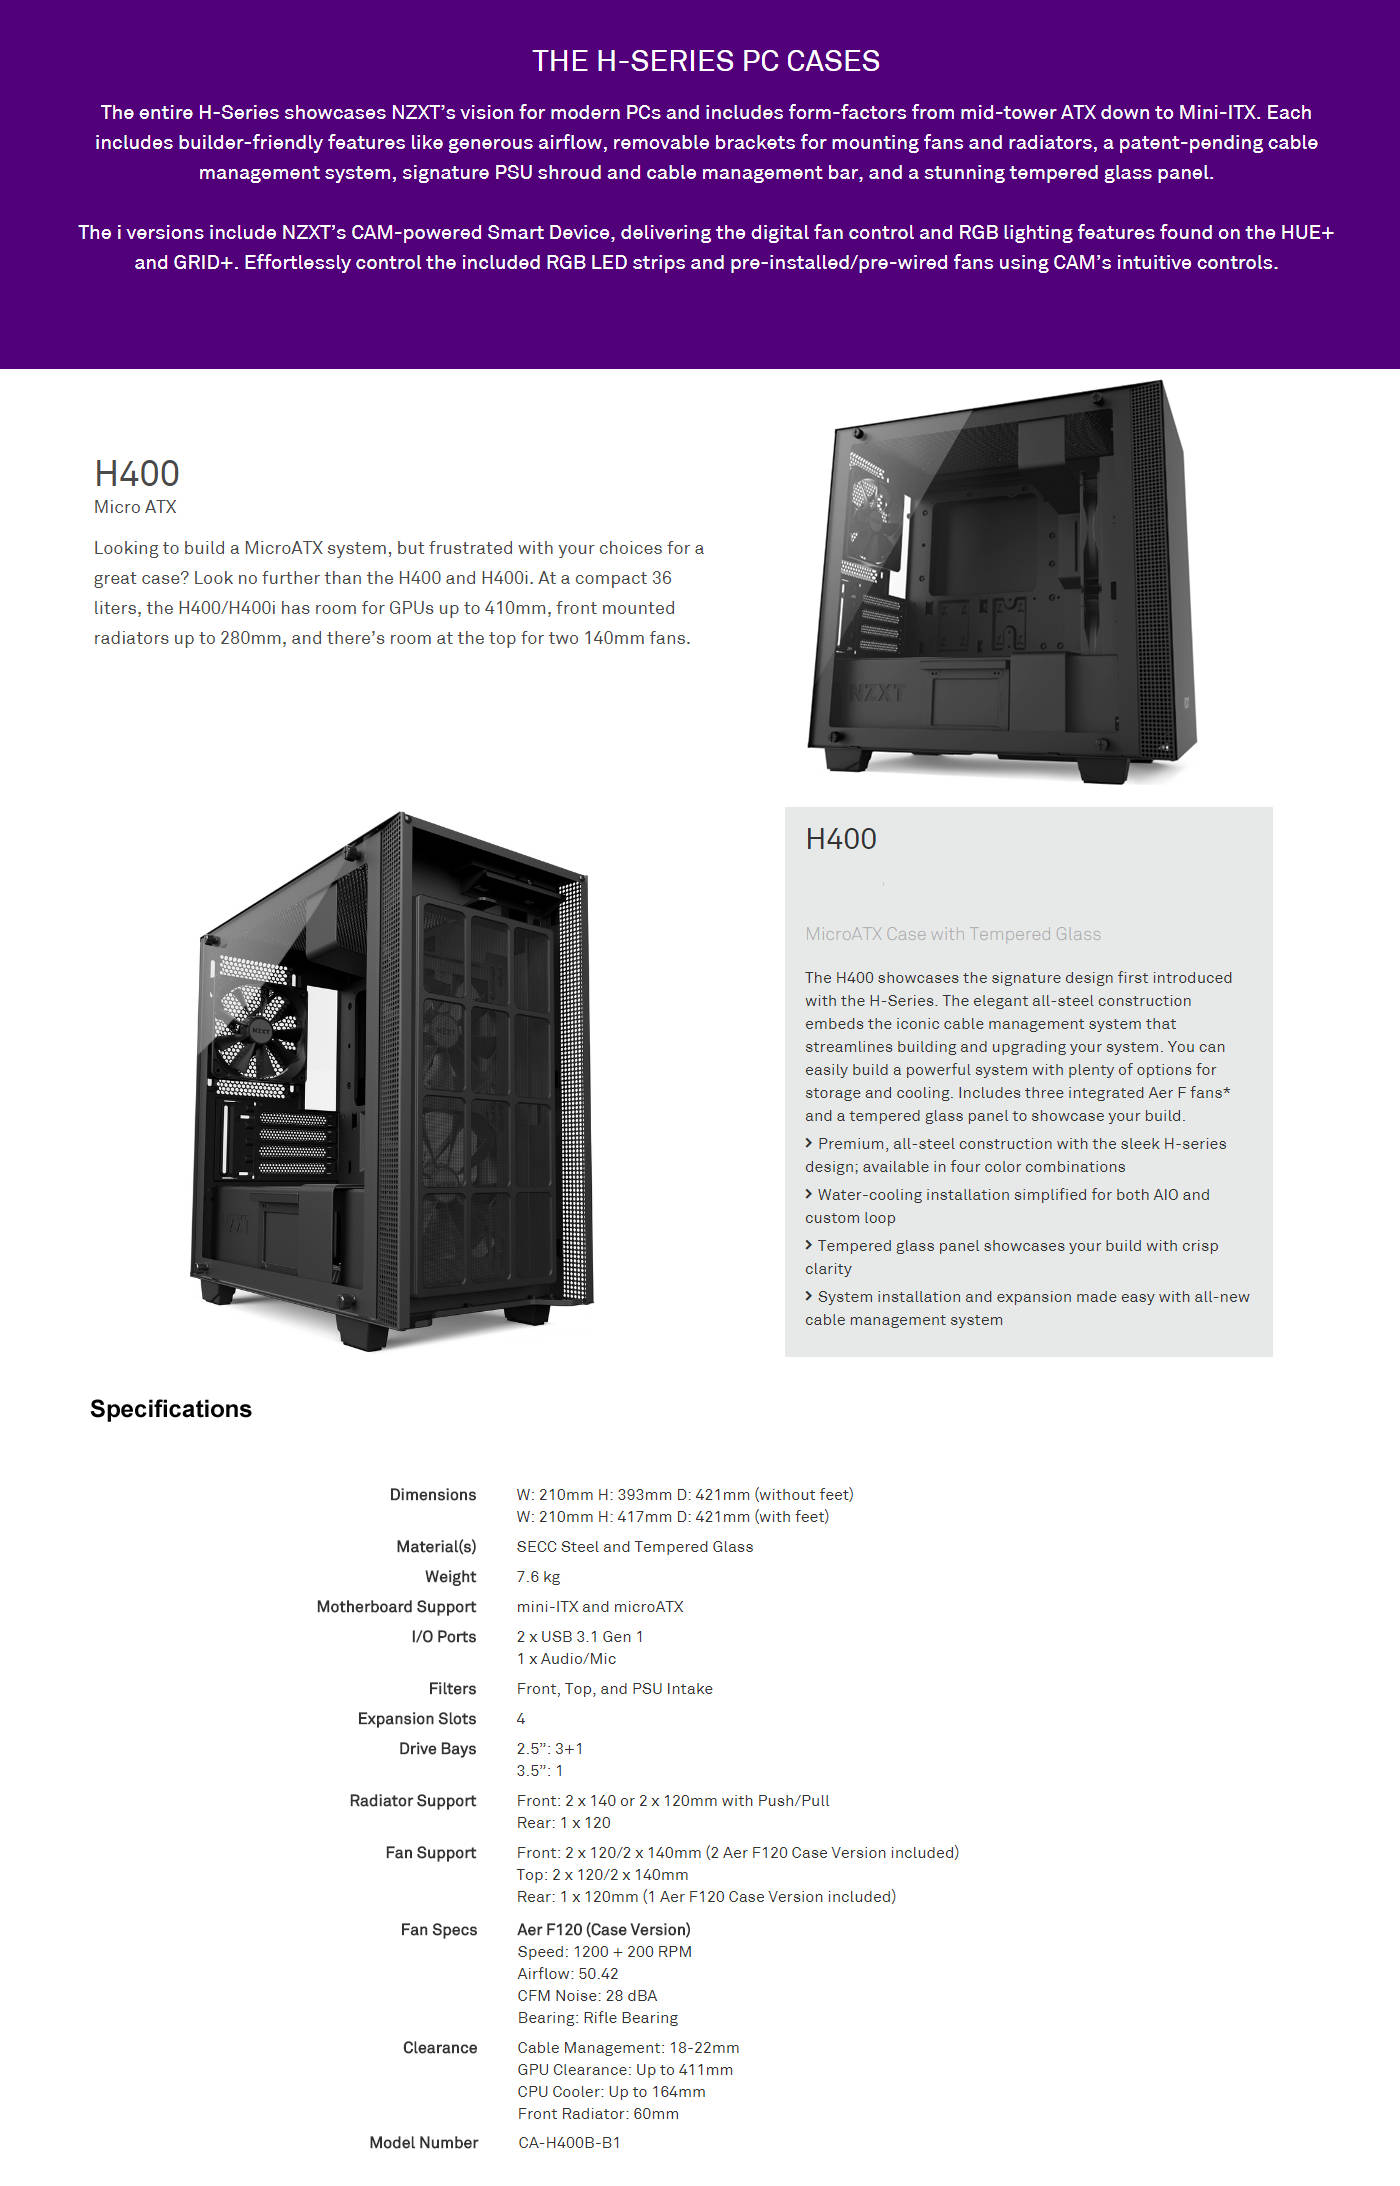  Buy Online Nzxt H400 MicroATX Case with Tempered Glass - Matte Black (CA-H400B-B1)